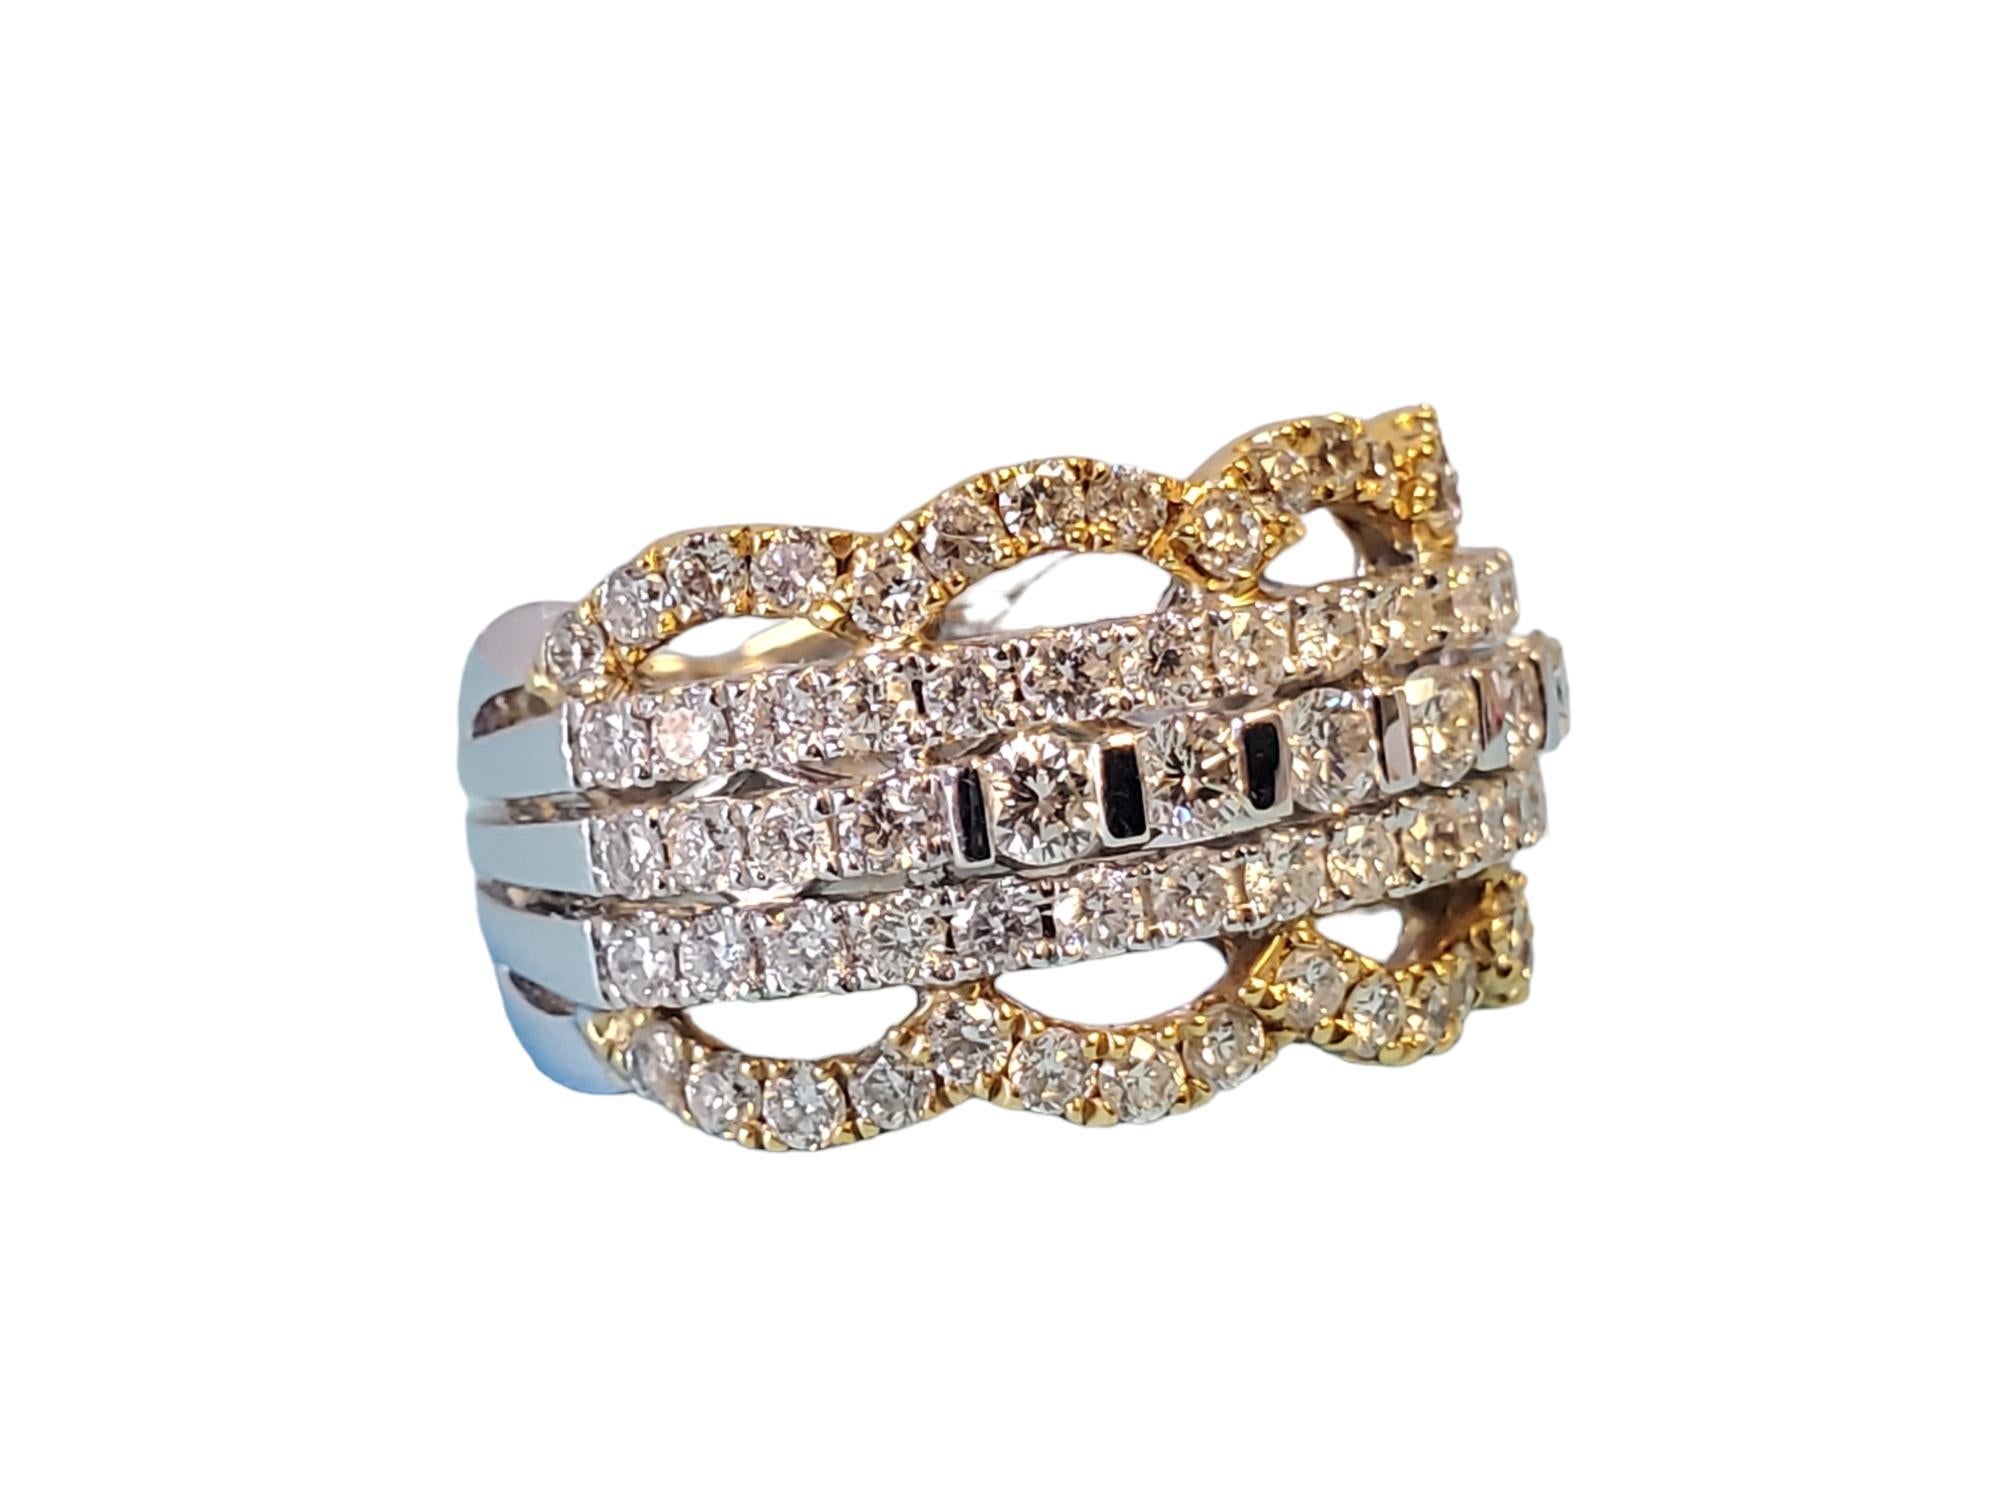 Listed is this beautiful unique 18k diamond band in 18k white gold with 18k yellow gold designs added in. This ring features high end 1.74tcw white vs diamonds throughout with life and sparkle. The band is solid and well crafted with a 12mm width on